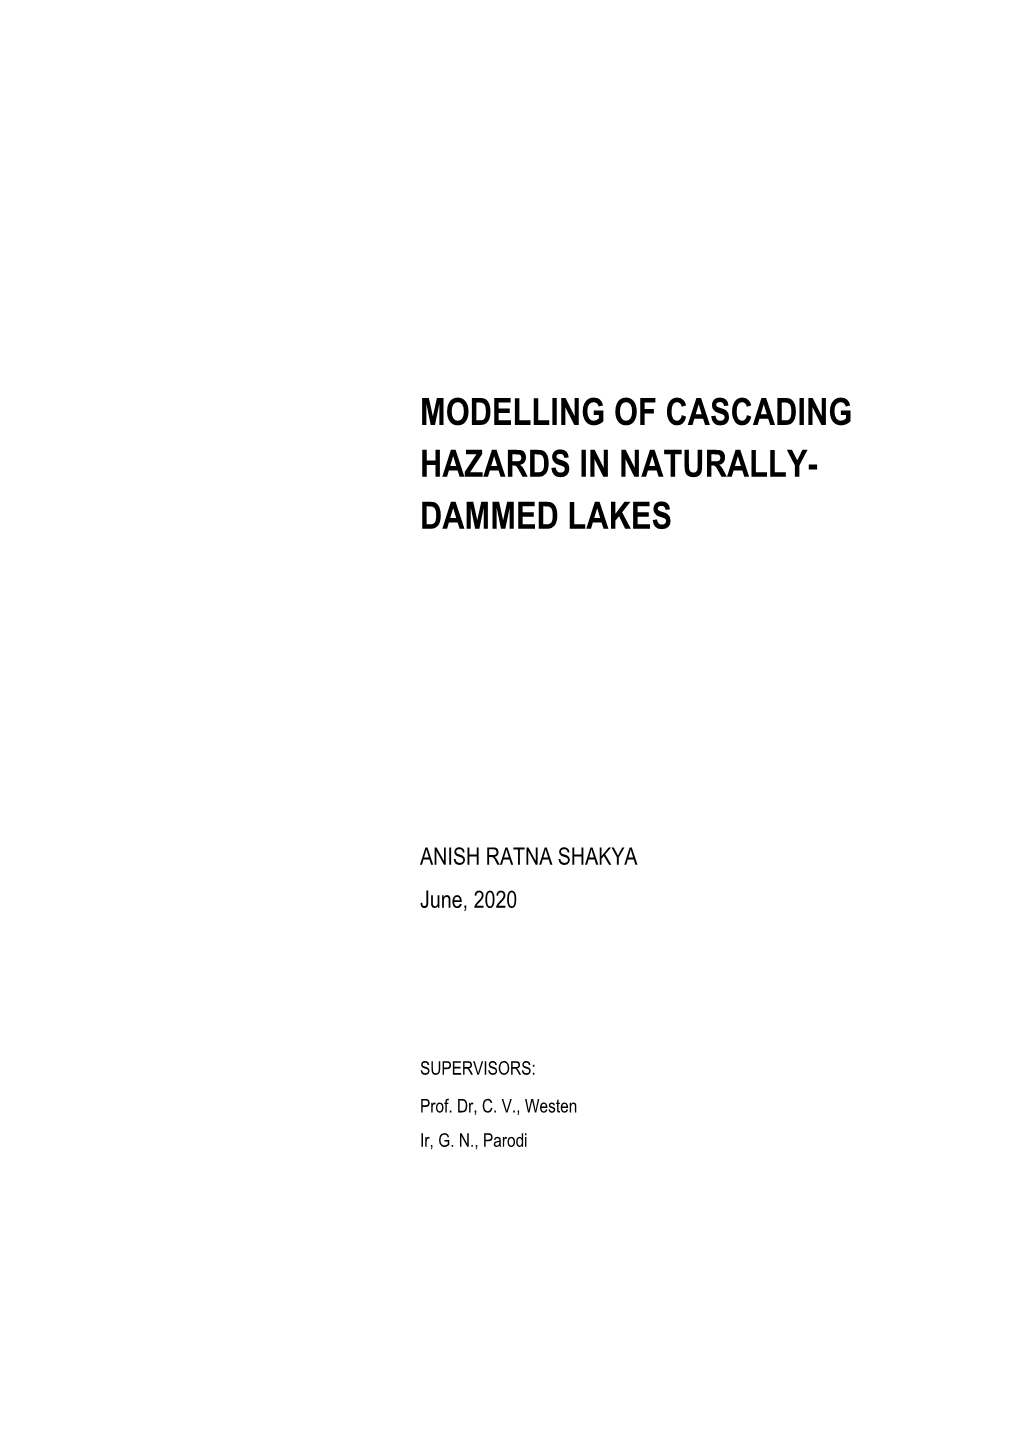 Modelling of Cascading Hazards in Naturally- Dammed Lakes